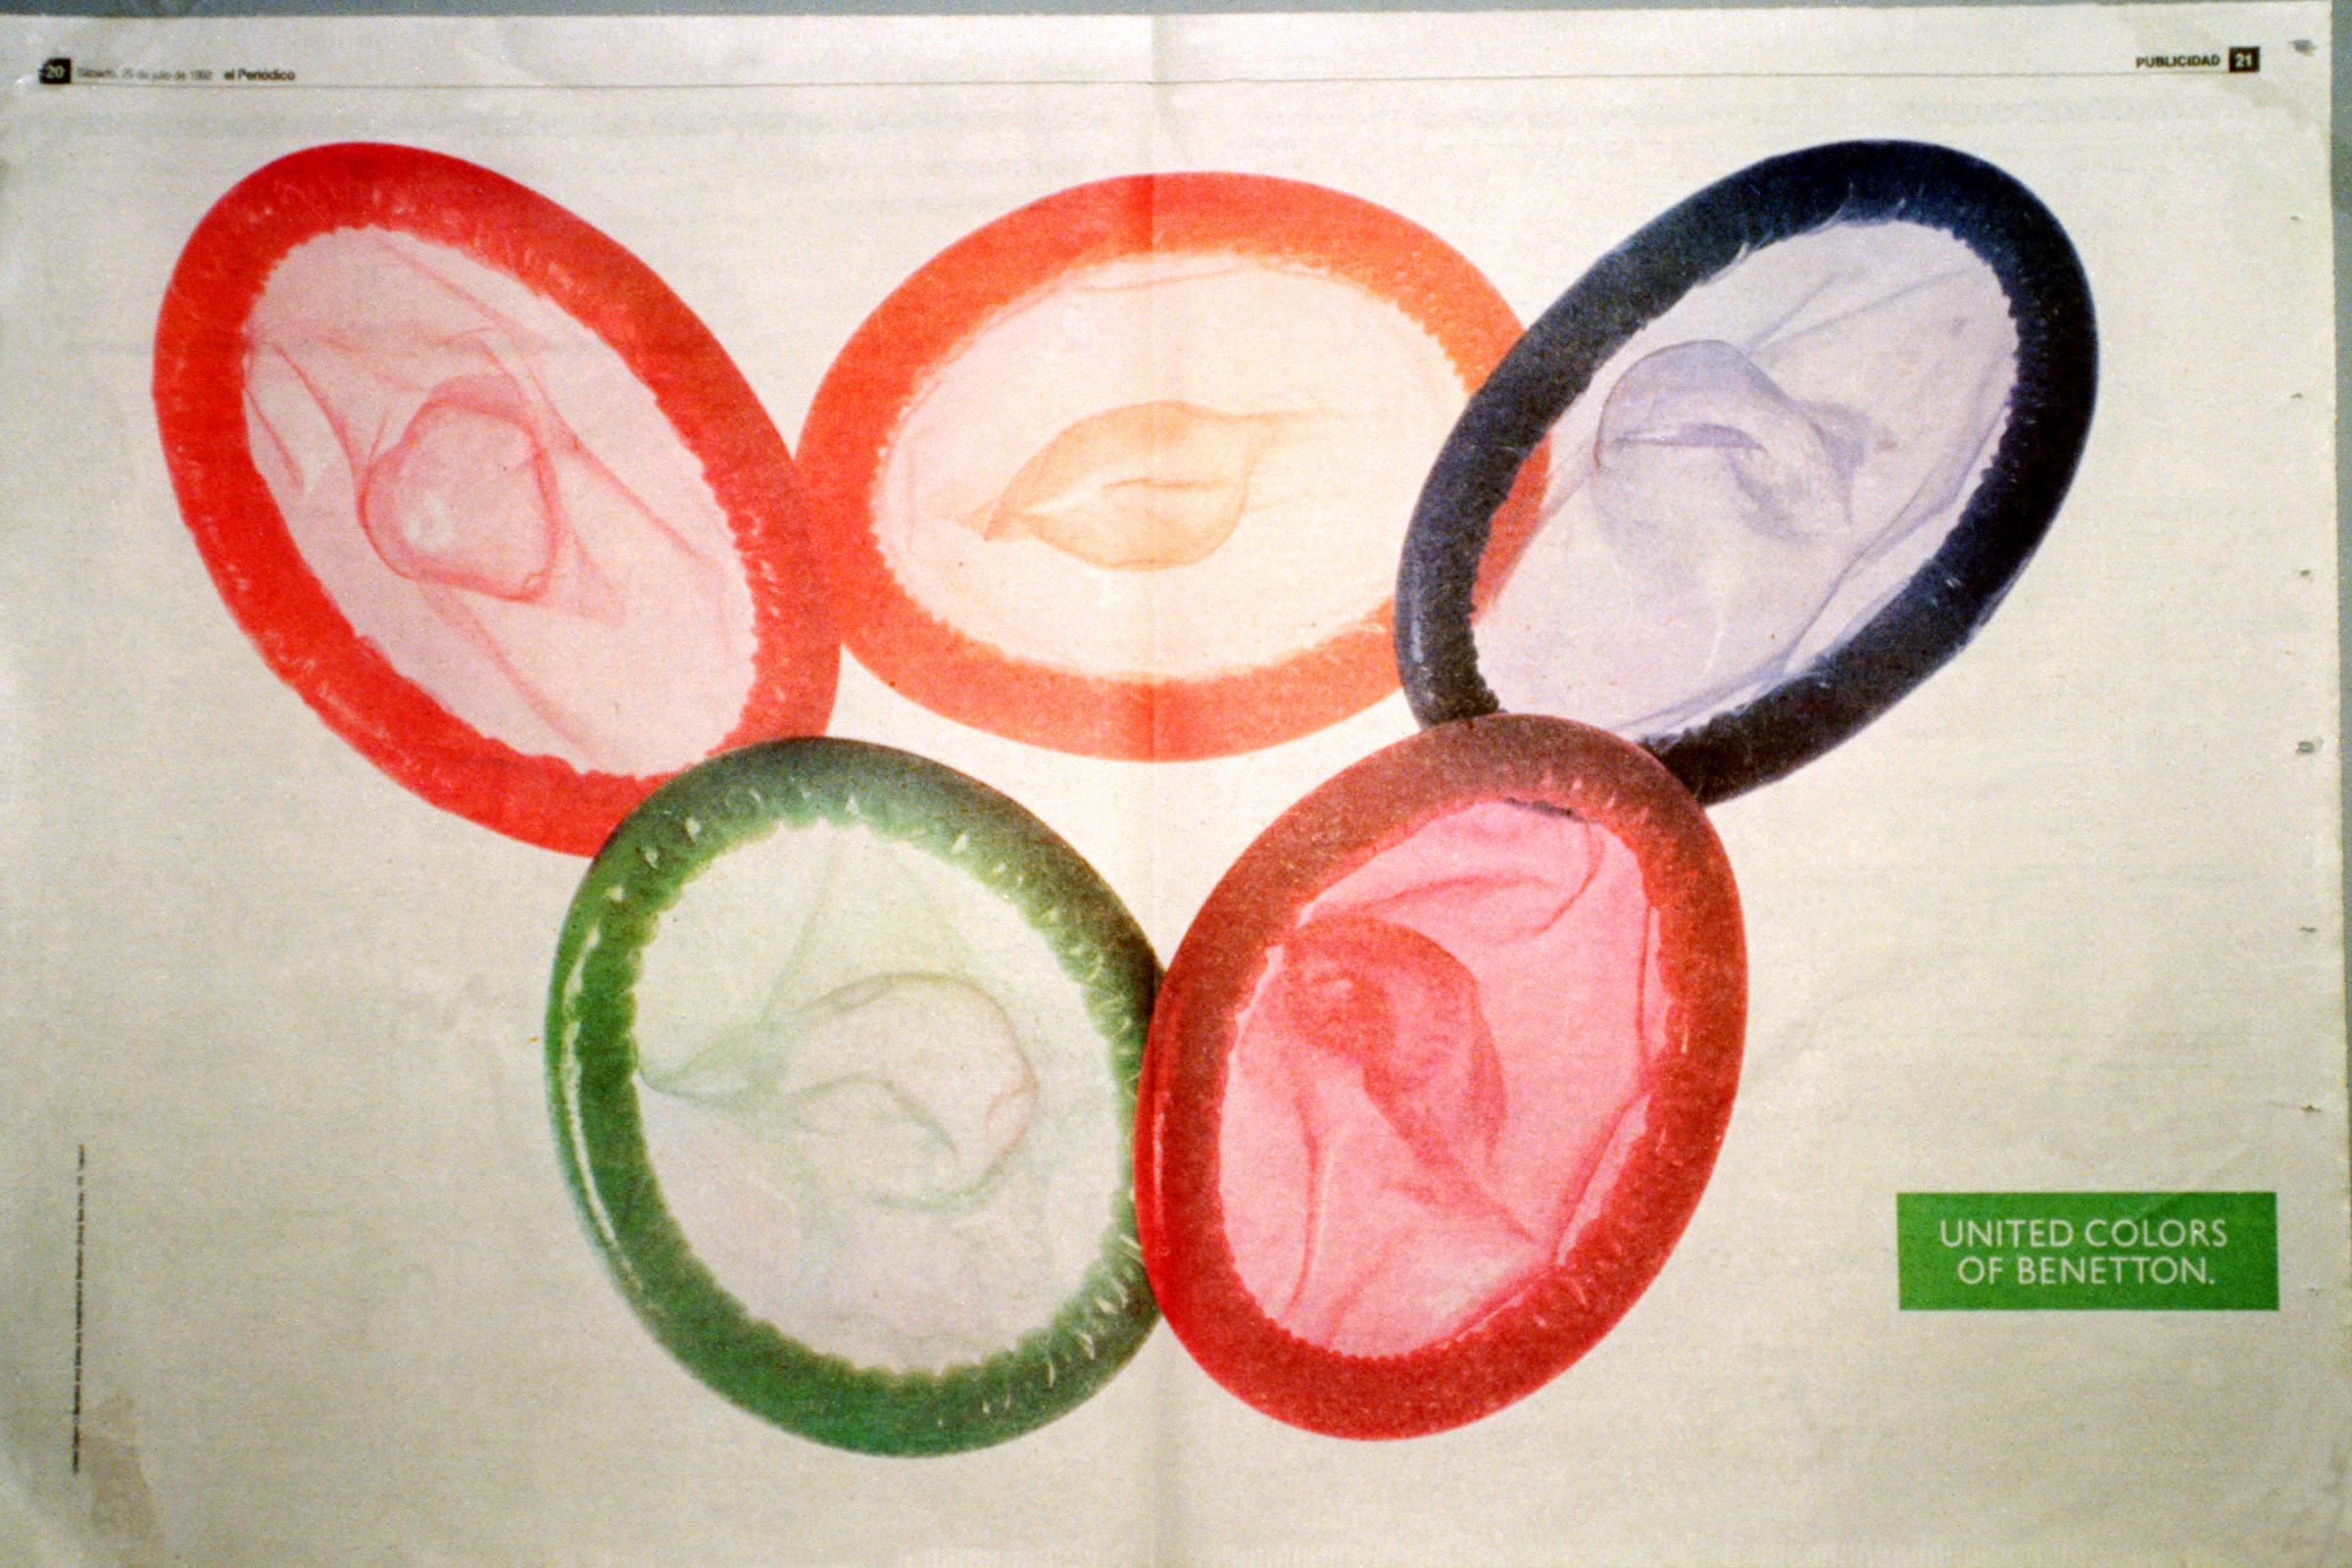 The Benneton condom advertisement at the Olympics in Rio de Janeiro. (Photo by Claire Mackintosh/EMPICS via Getty Images)